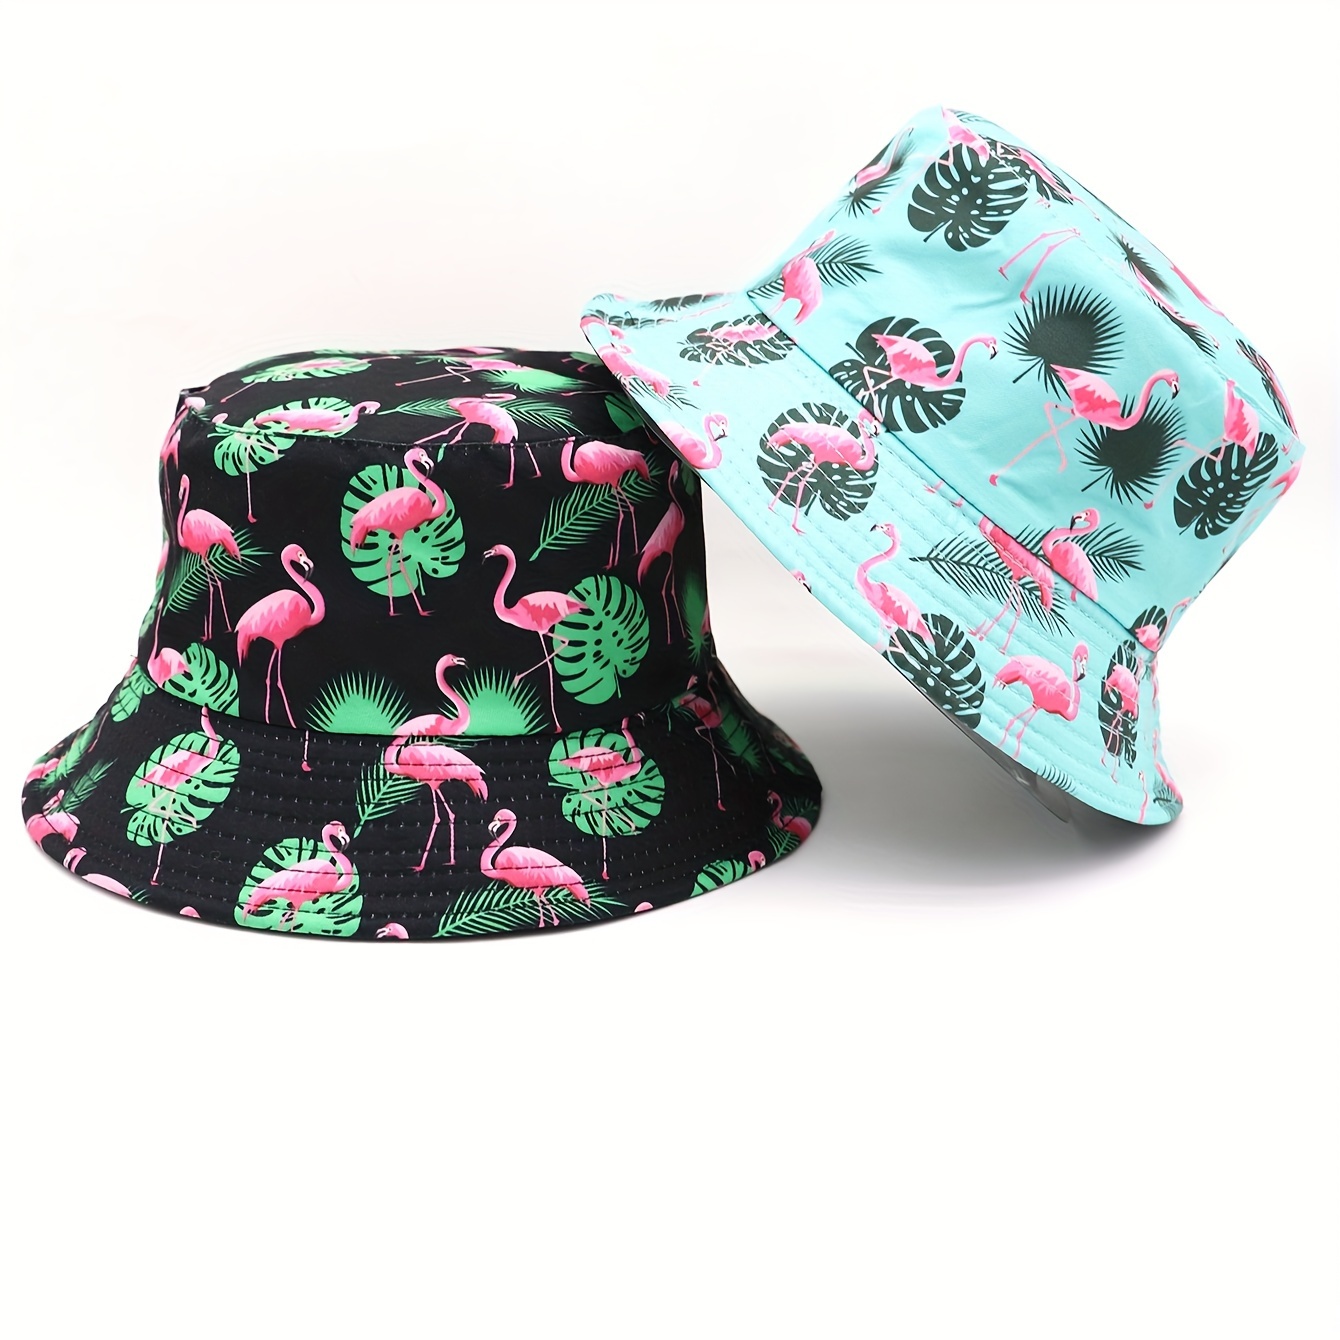 

Unisex Flamingo Print Reversible Bucket Hat, Cotton Outdoor Sun Hat With Tropical Design, Perfect For Beach And Travel, 1 Size